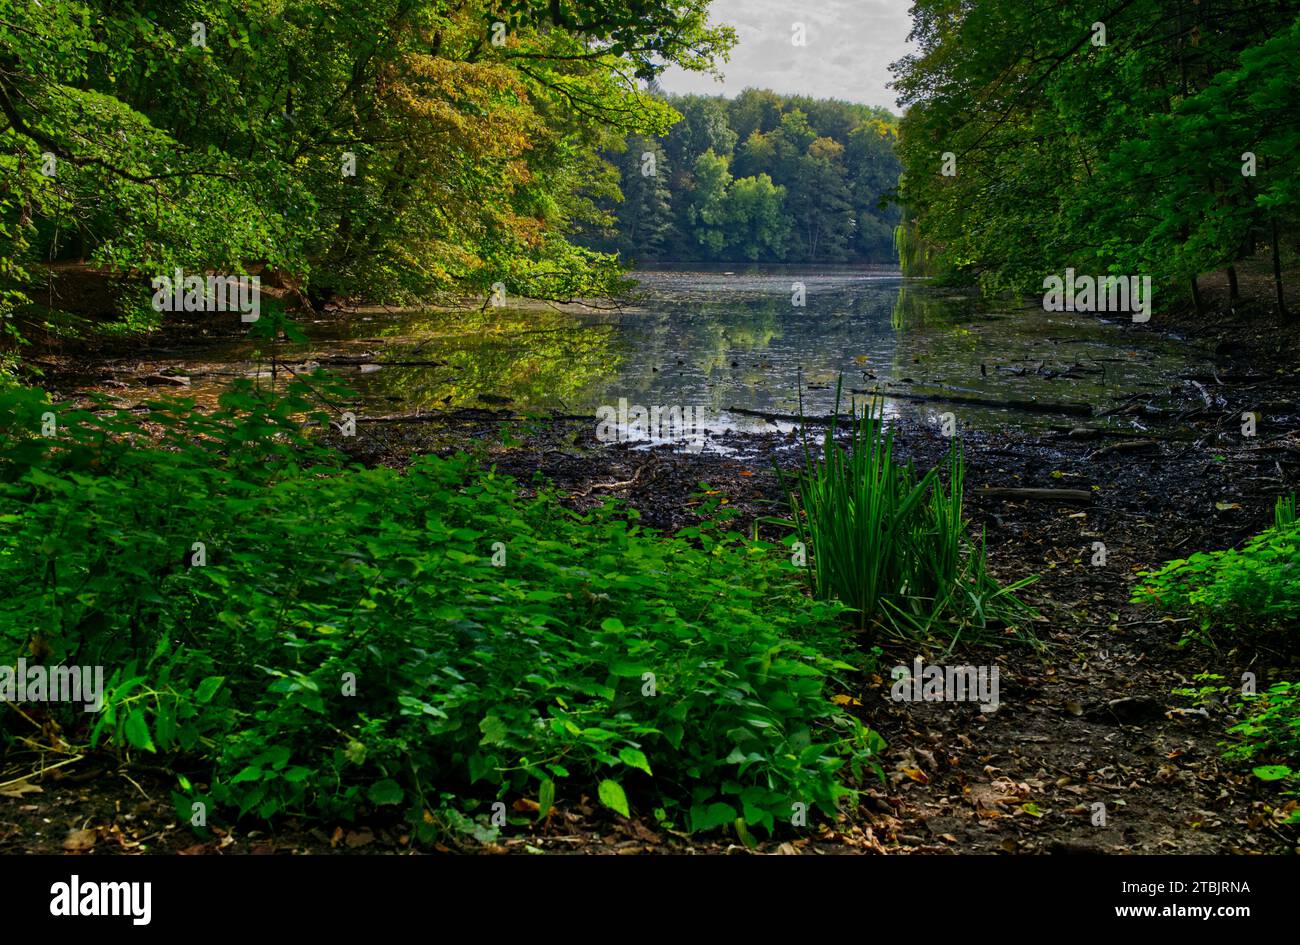 appealing scenery at a lakeshore of the Dietesheimer quarries (Mühlheim, Hesse, Germany) in green and autumnal colors Stock Photo